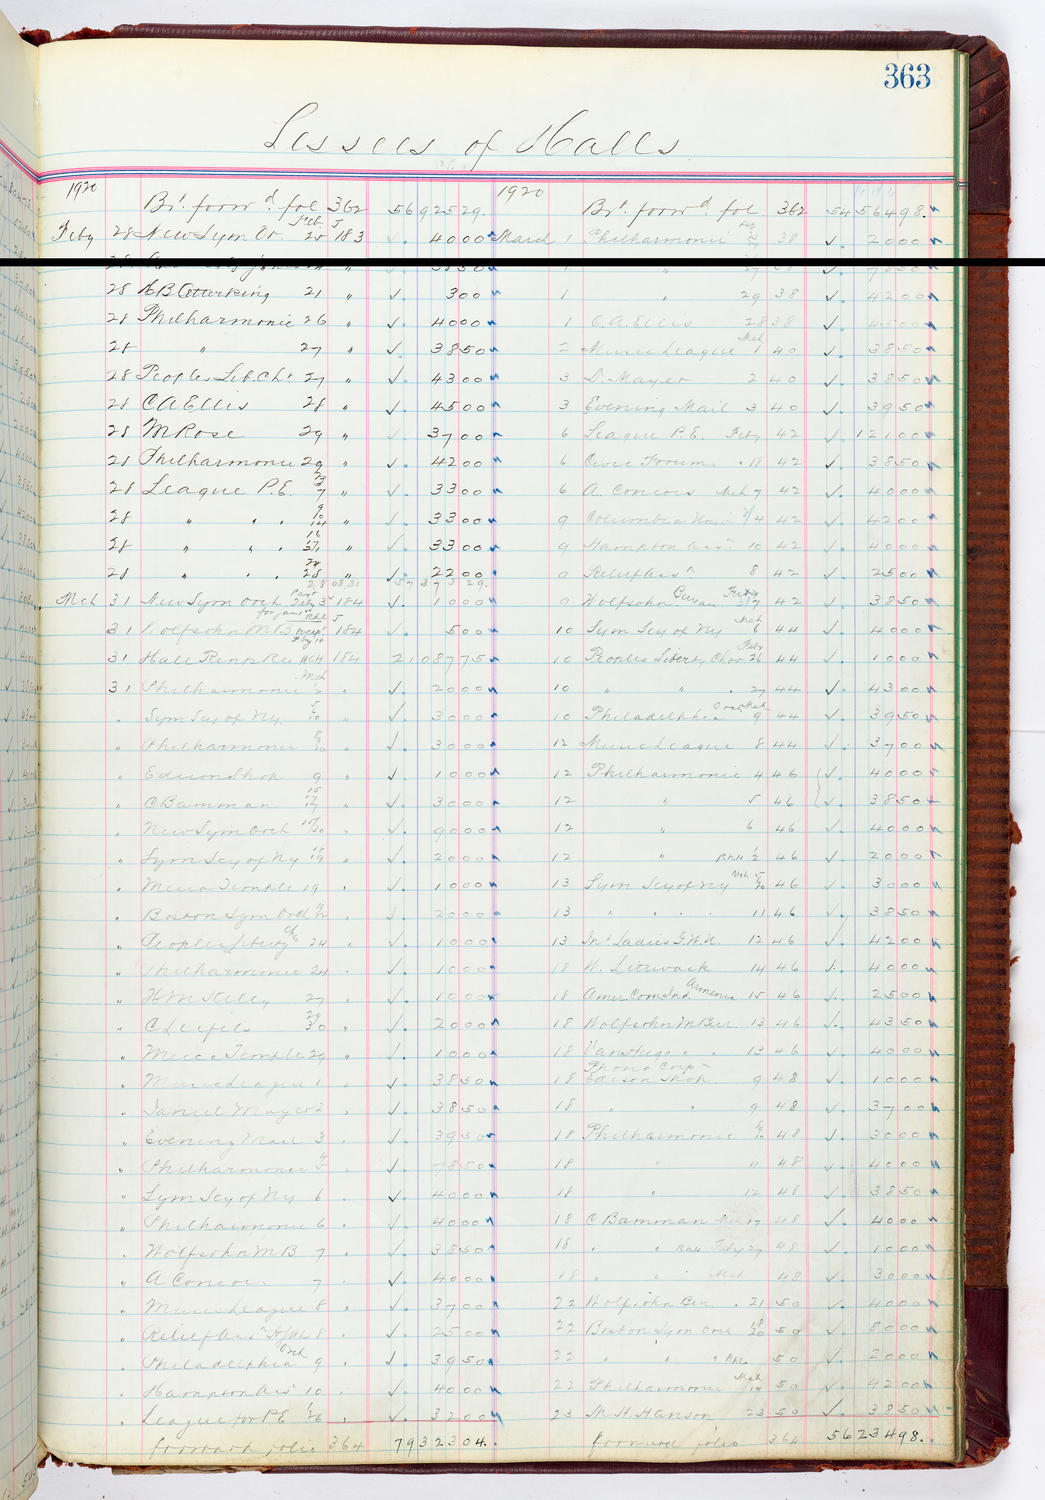 Music Hall Accounting Ledger, volume 4, page 363